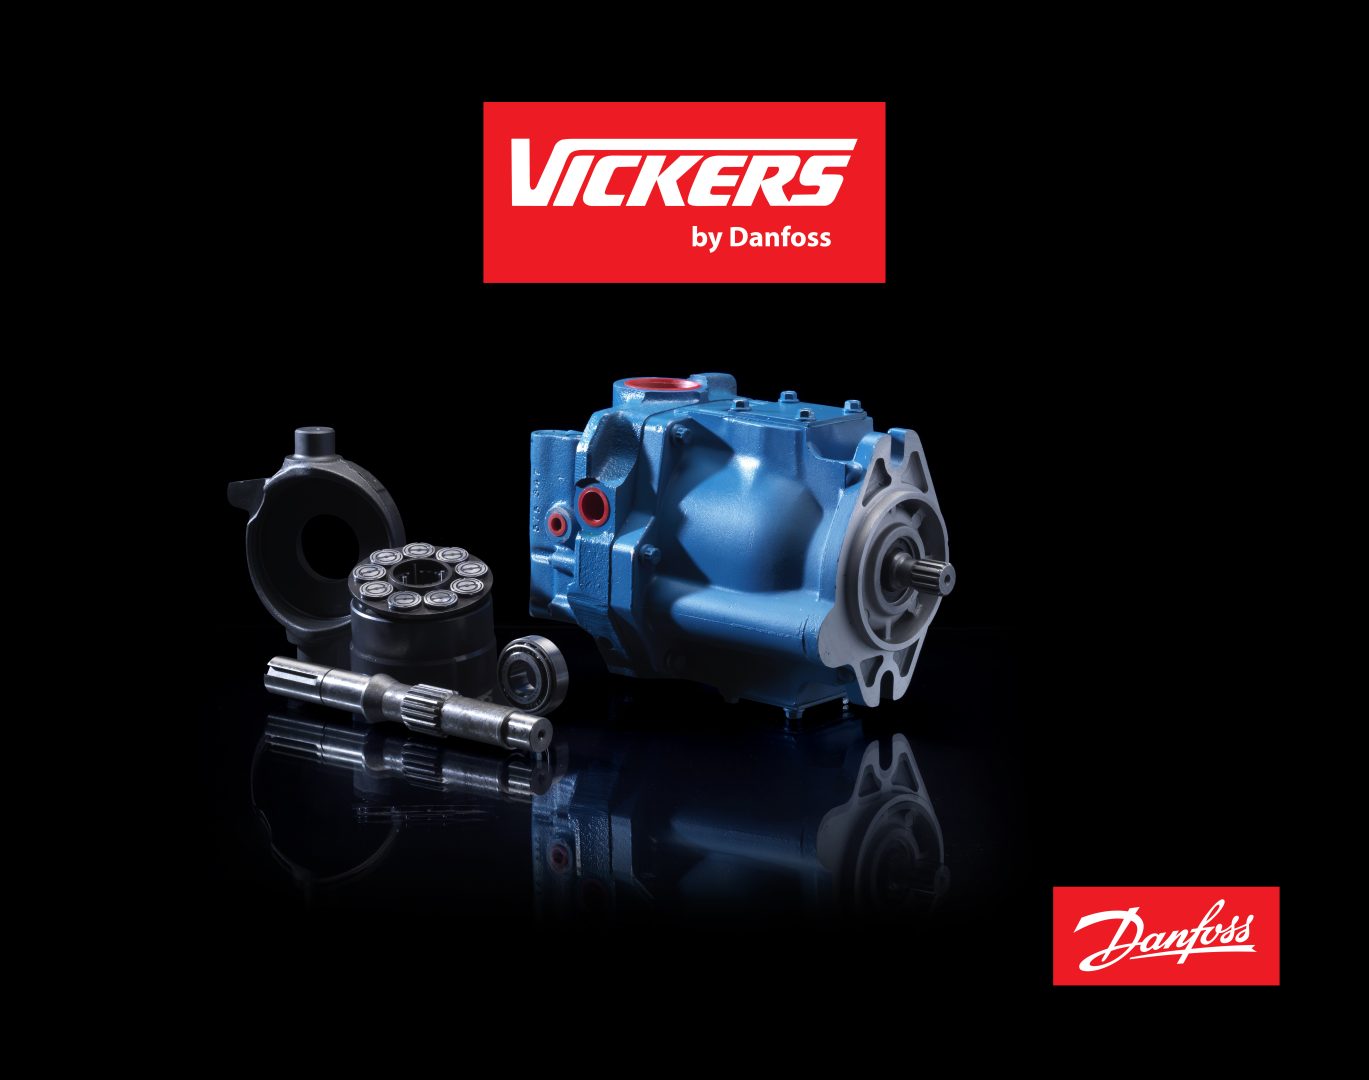 remb vickers by danfoss